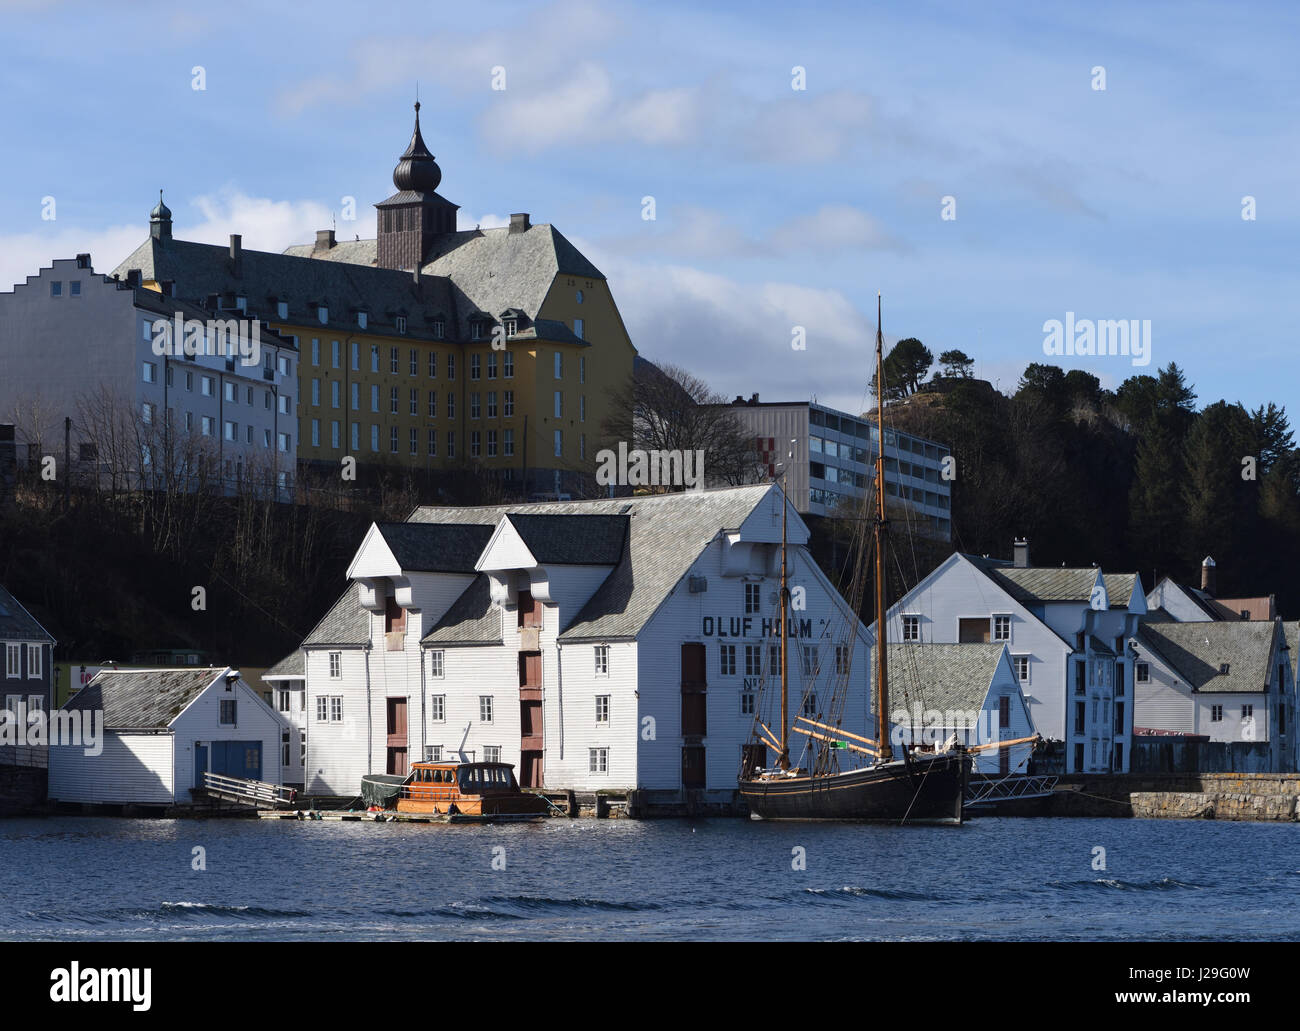 The Aspøy School, Aspøy skole, primary school with its tower and dome sits above the entrance to the harbour, the Brosundte,  of the port of Ålesund. Stock Photo